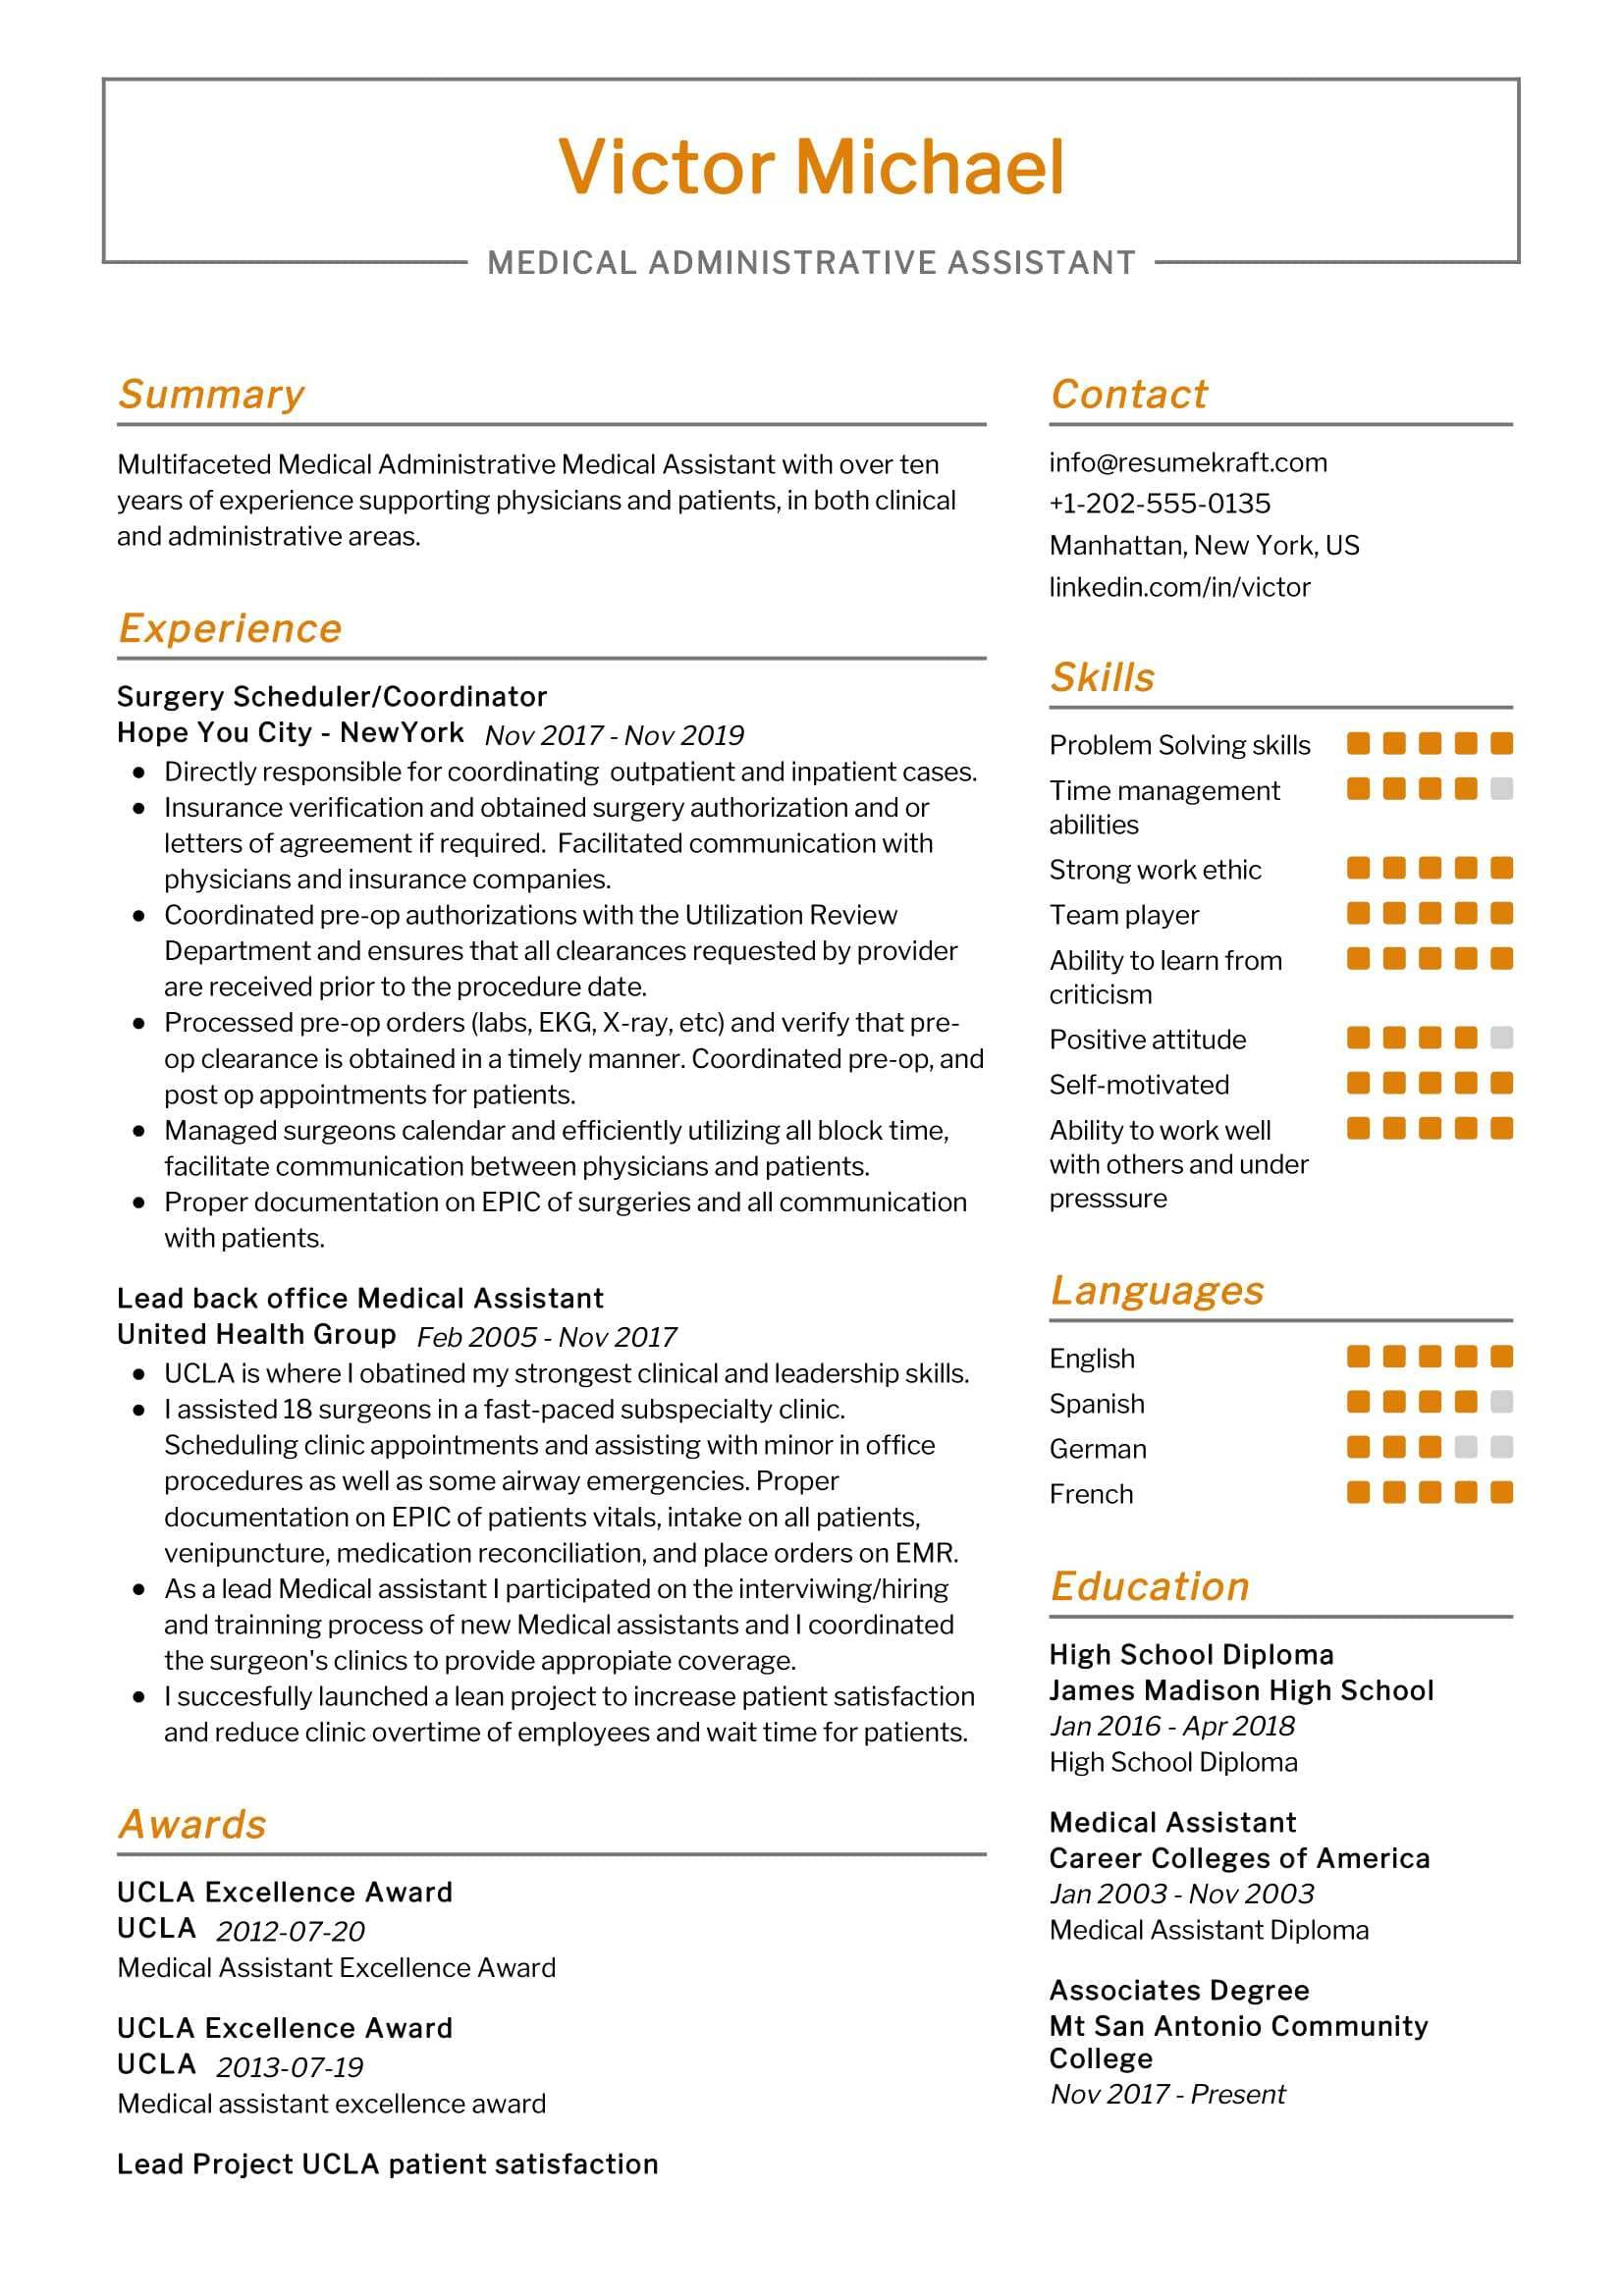 Medical assistant Resume Template Free Download Medical Administrative assistant Resume Sample 2021 Writing Tips …